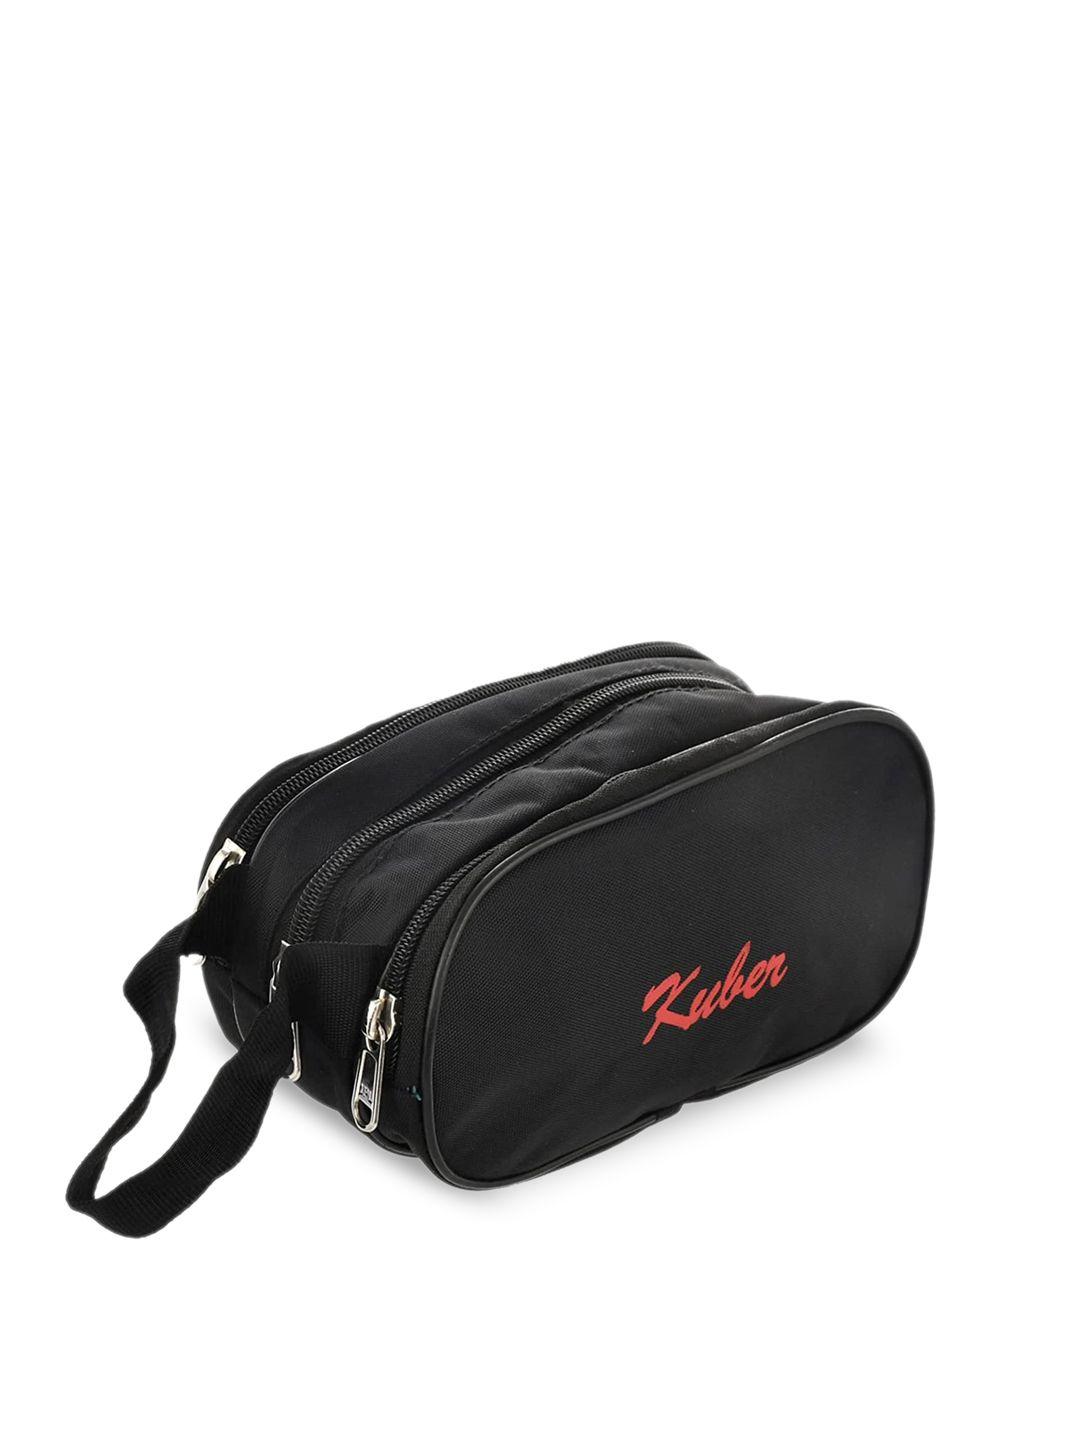 kuber industries black rexine toiletry pouch with carrying strap